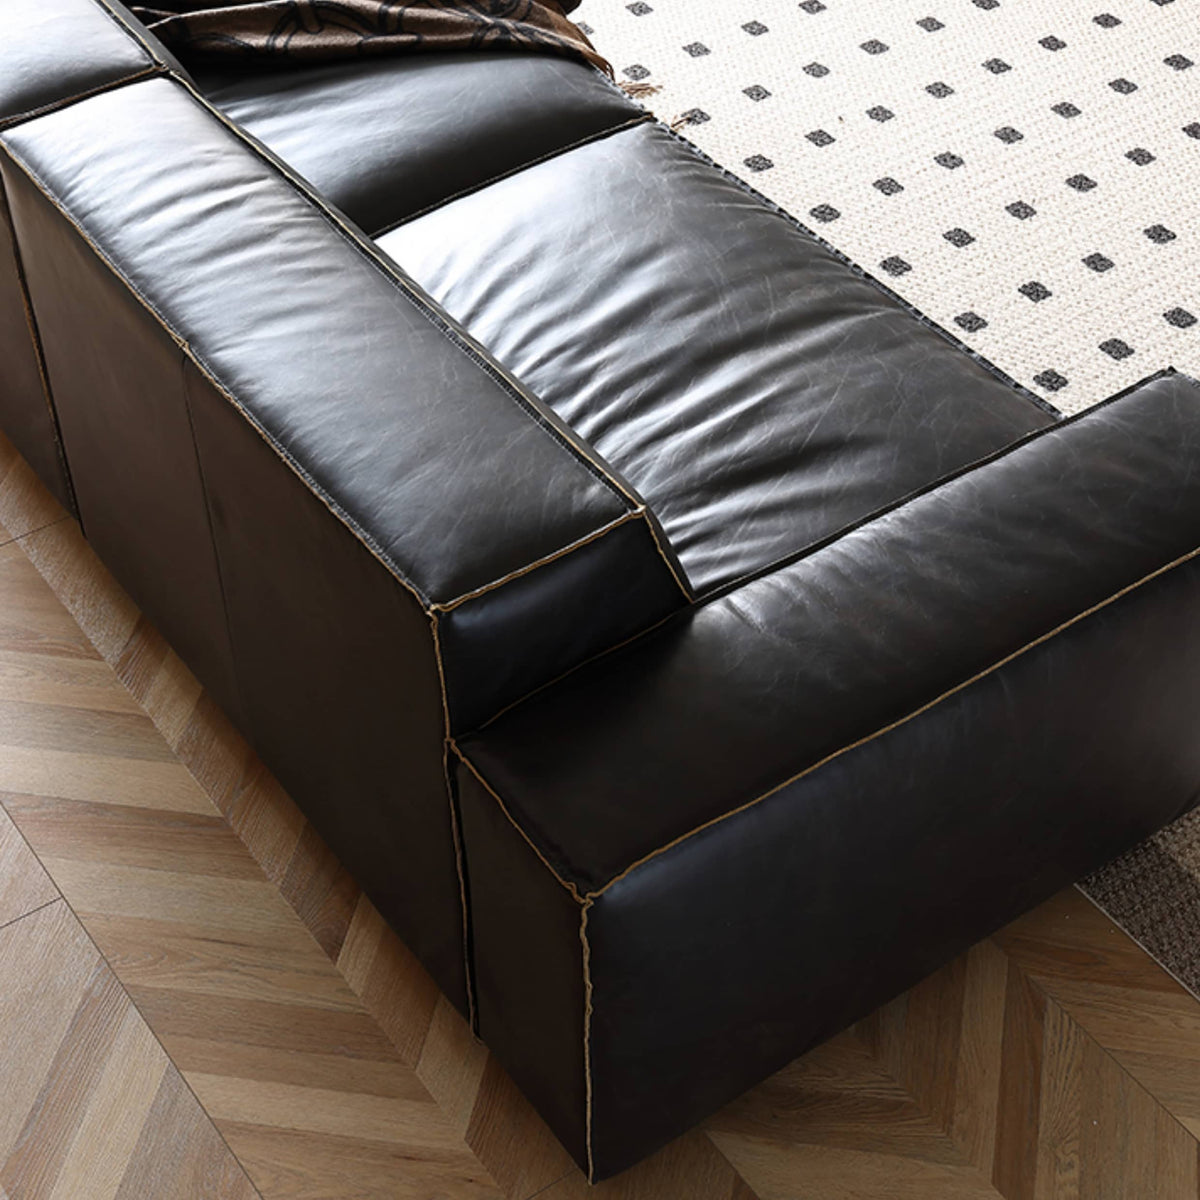 Luxurious Black Genuine Leather Sofa with Solid Wood Frame and Plush Down Filling Hersa-1644